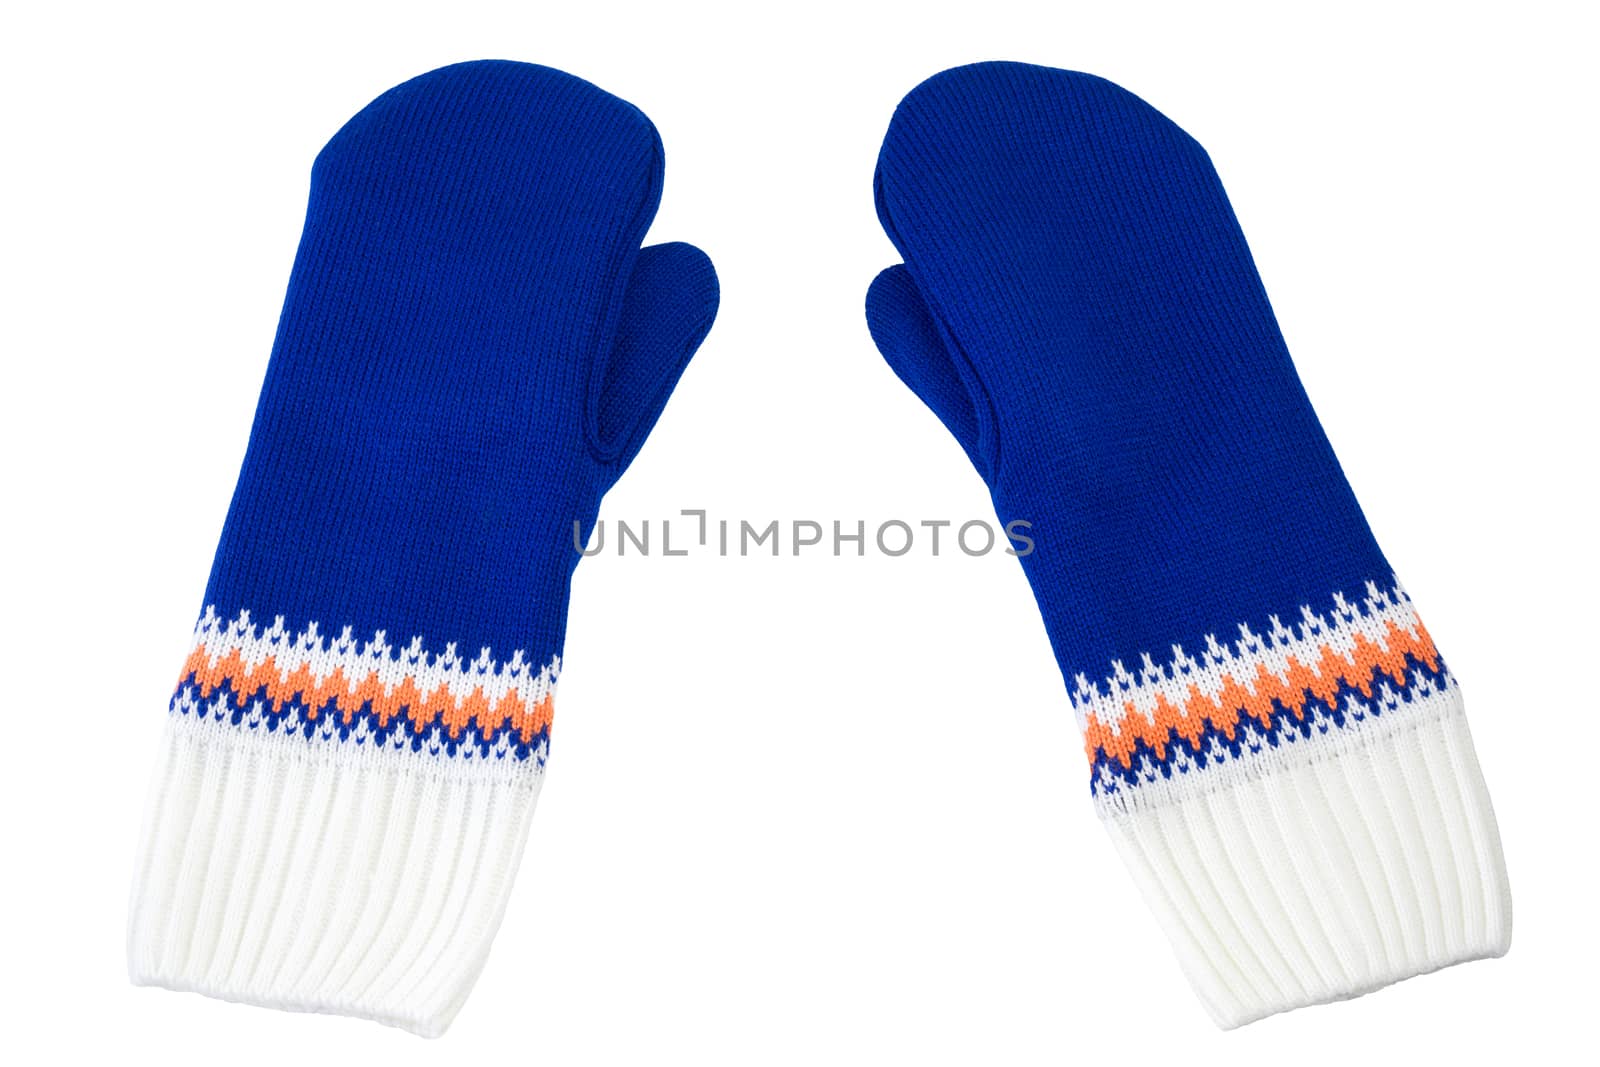 blue and white knited mittens isolated on white background.